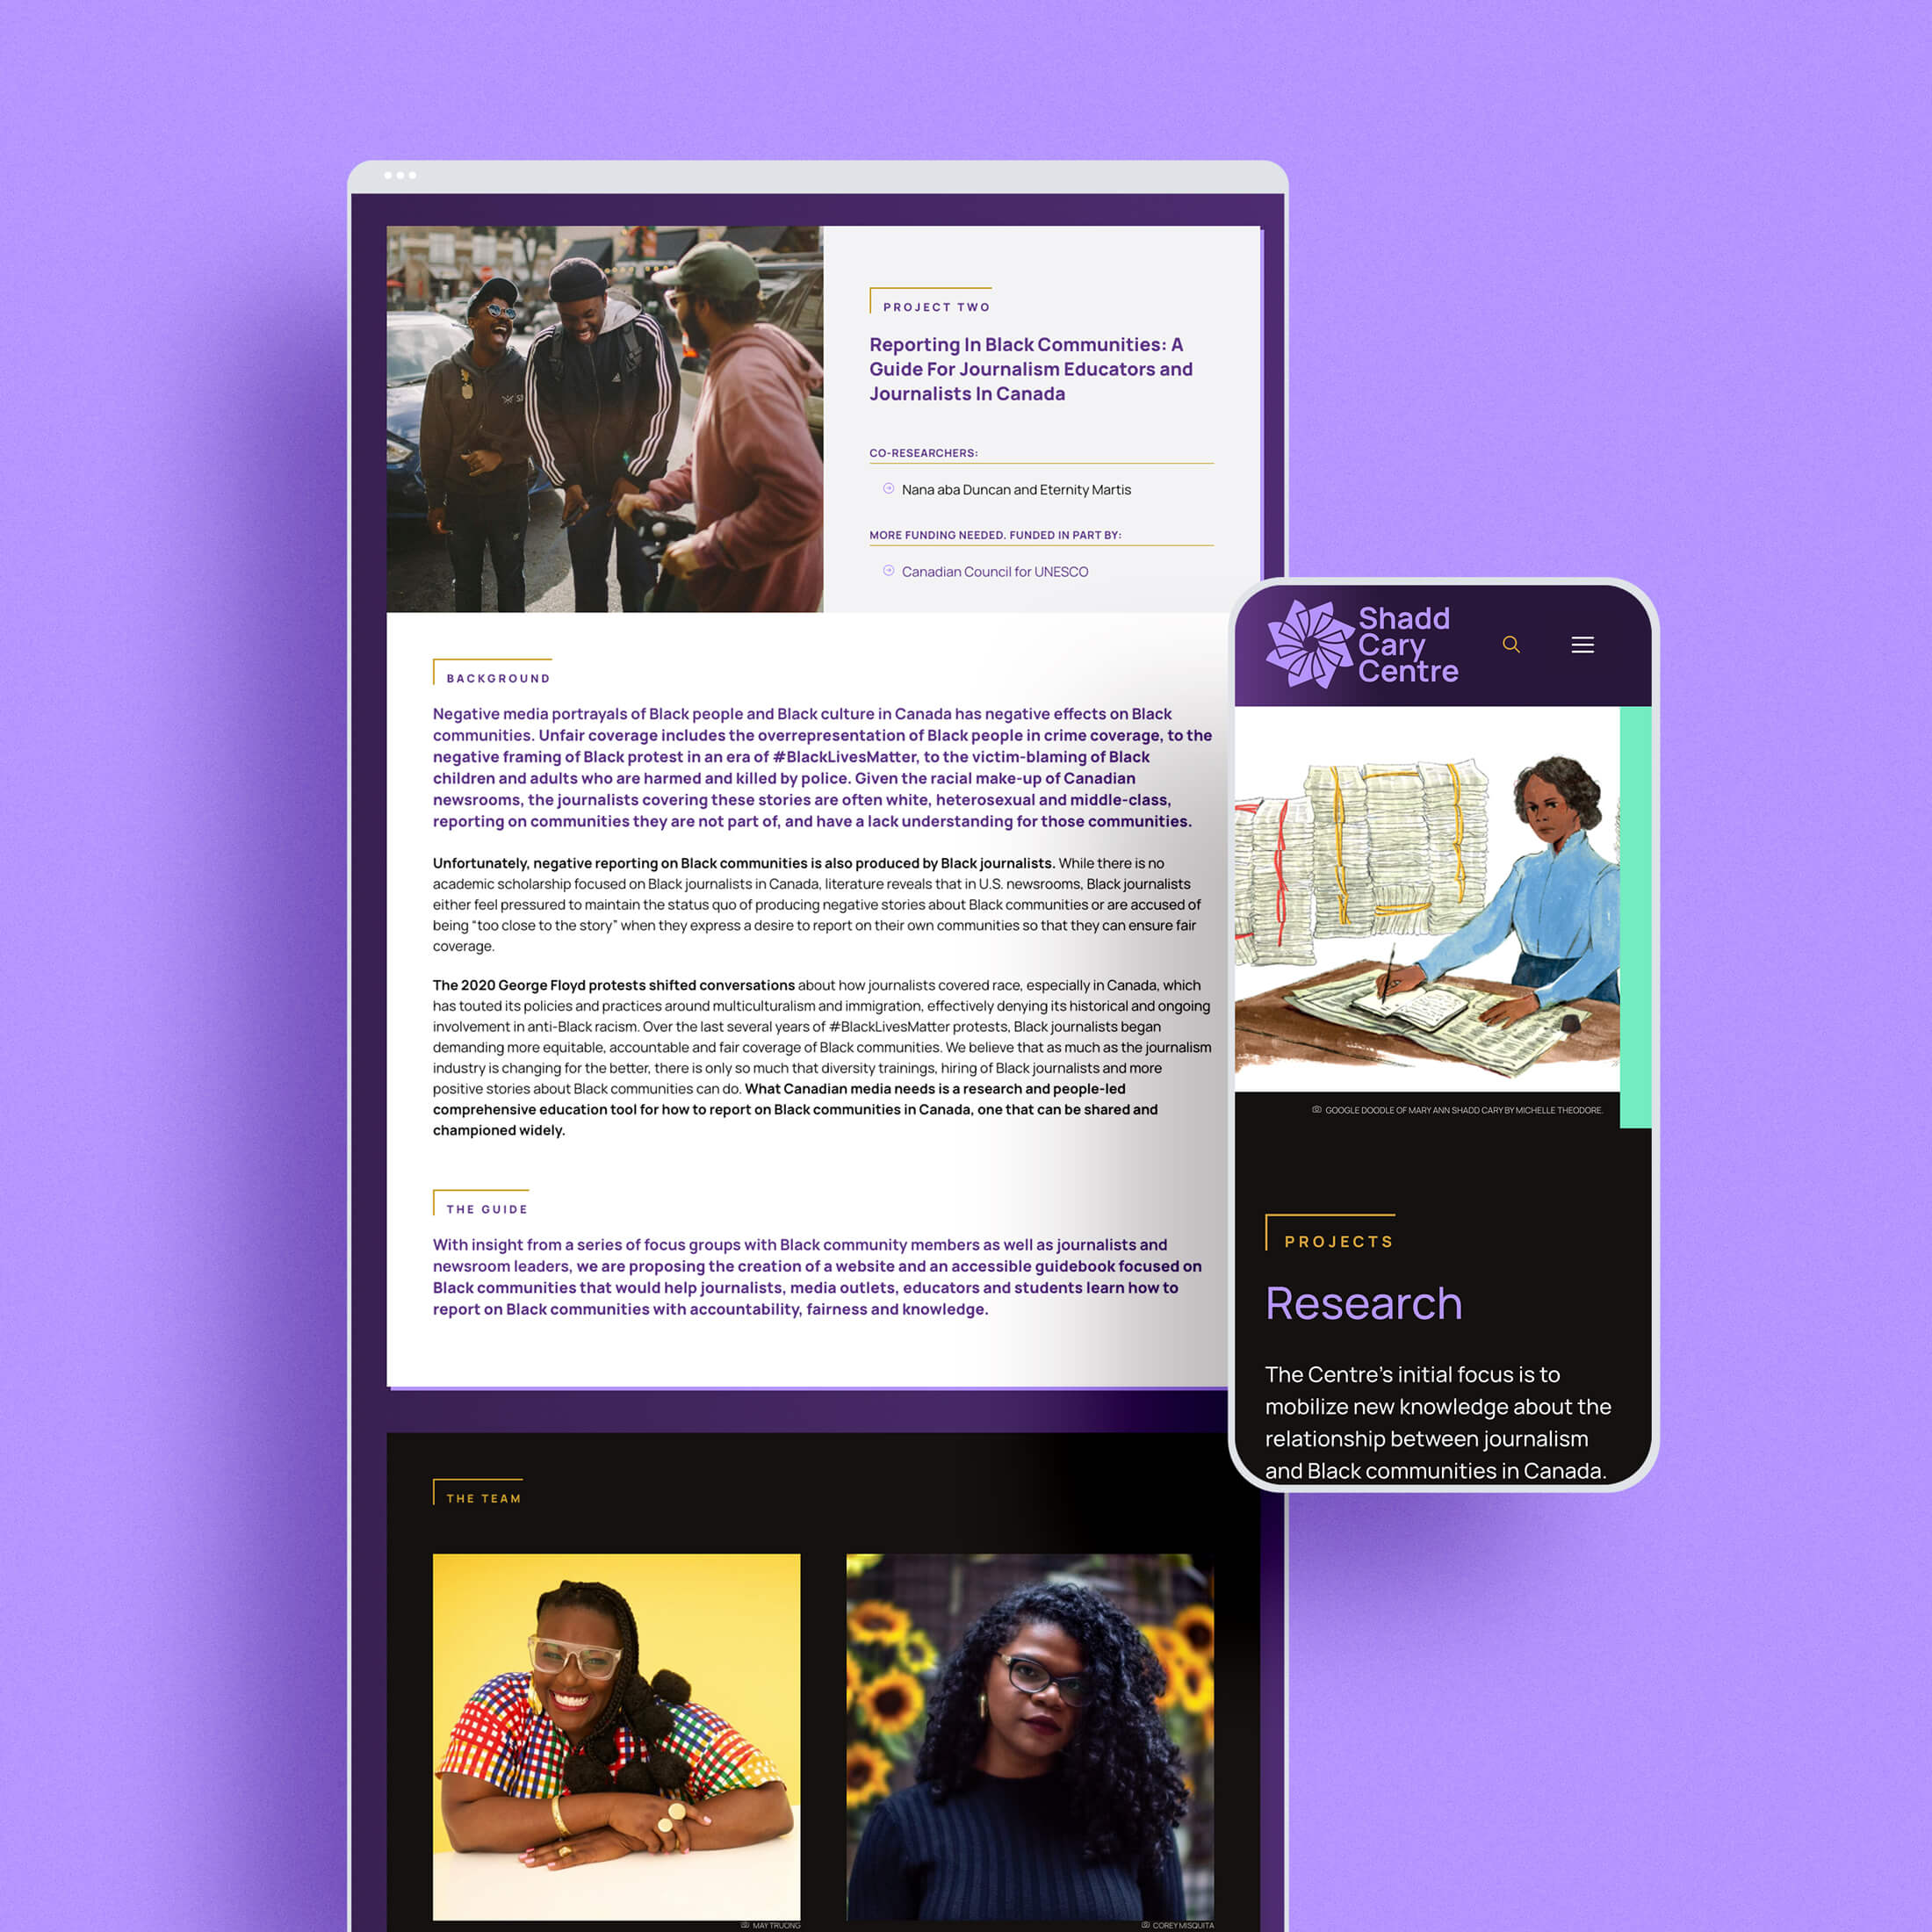 WordPress Website Design for The Mary Ann Shadd Cary Centre for Journalism and Belonging by Tulip Tree Creative